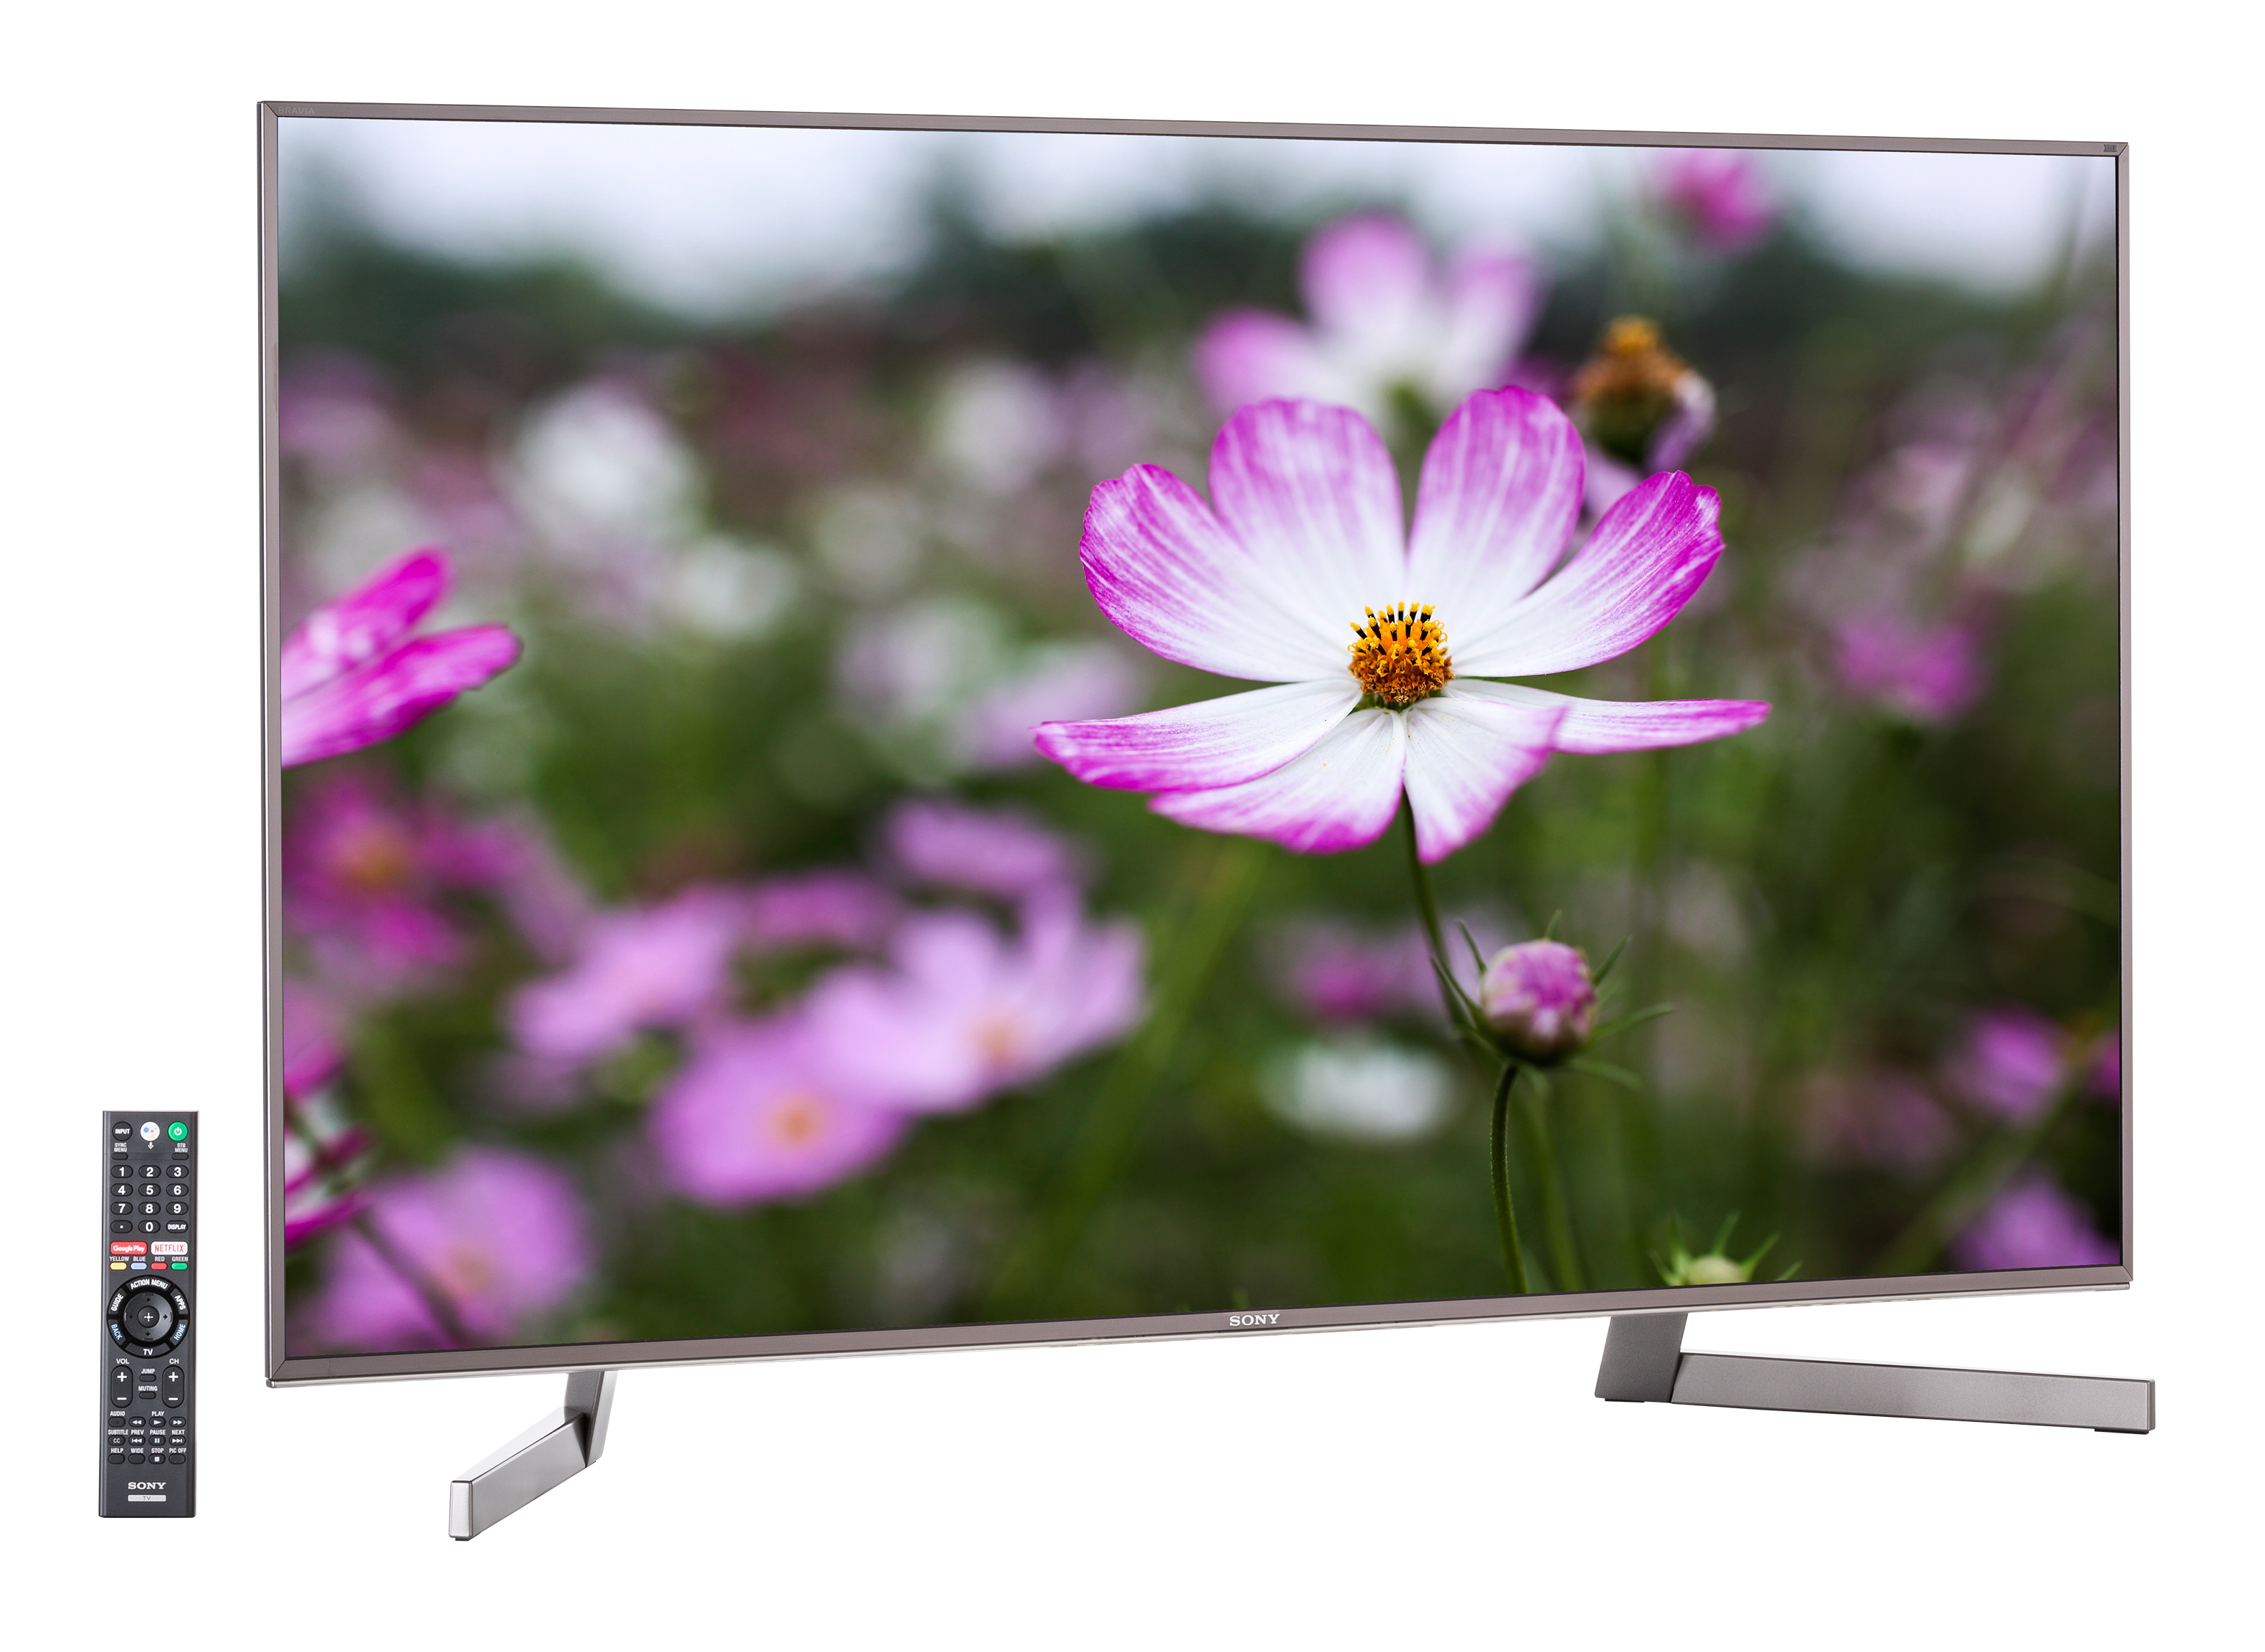 Sony XBR-49X900F TV Review - Consumer Reports